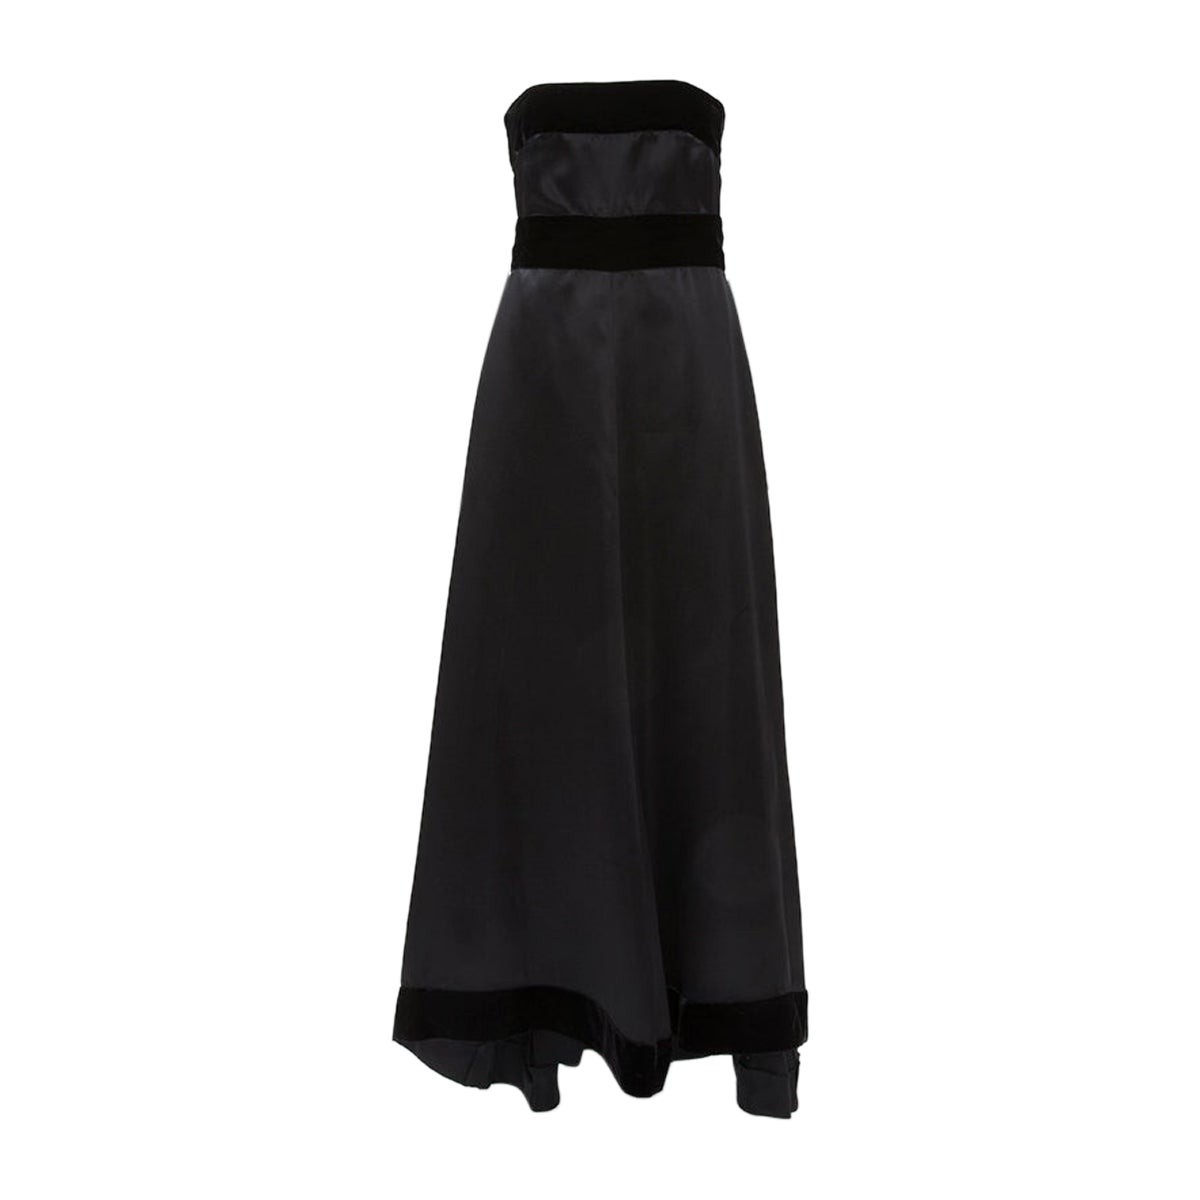 Chanel By Karl Lagerfeld Bows-Embellished Gown For Sale